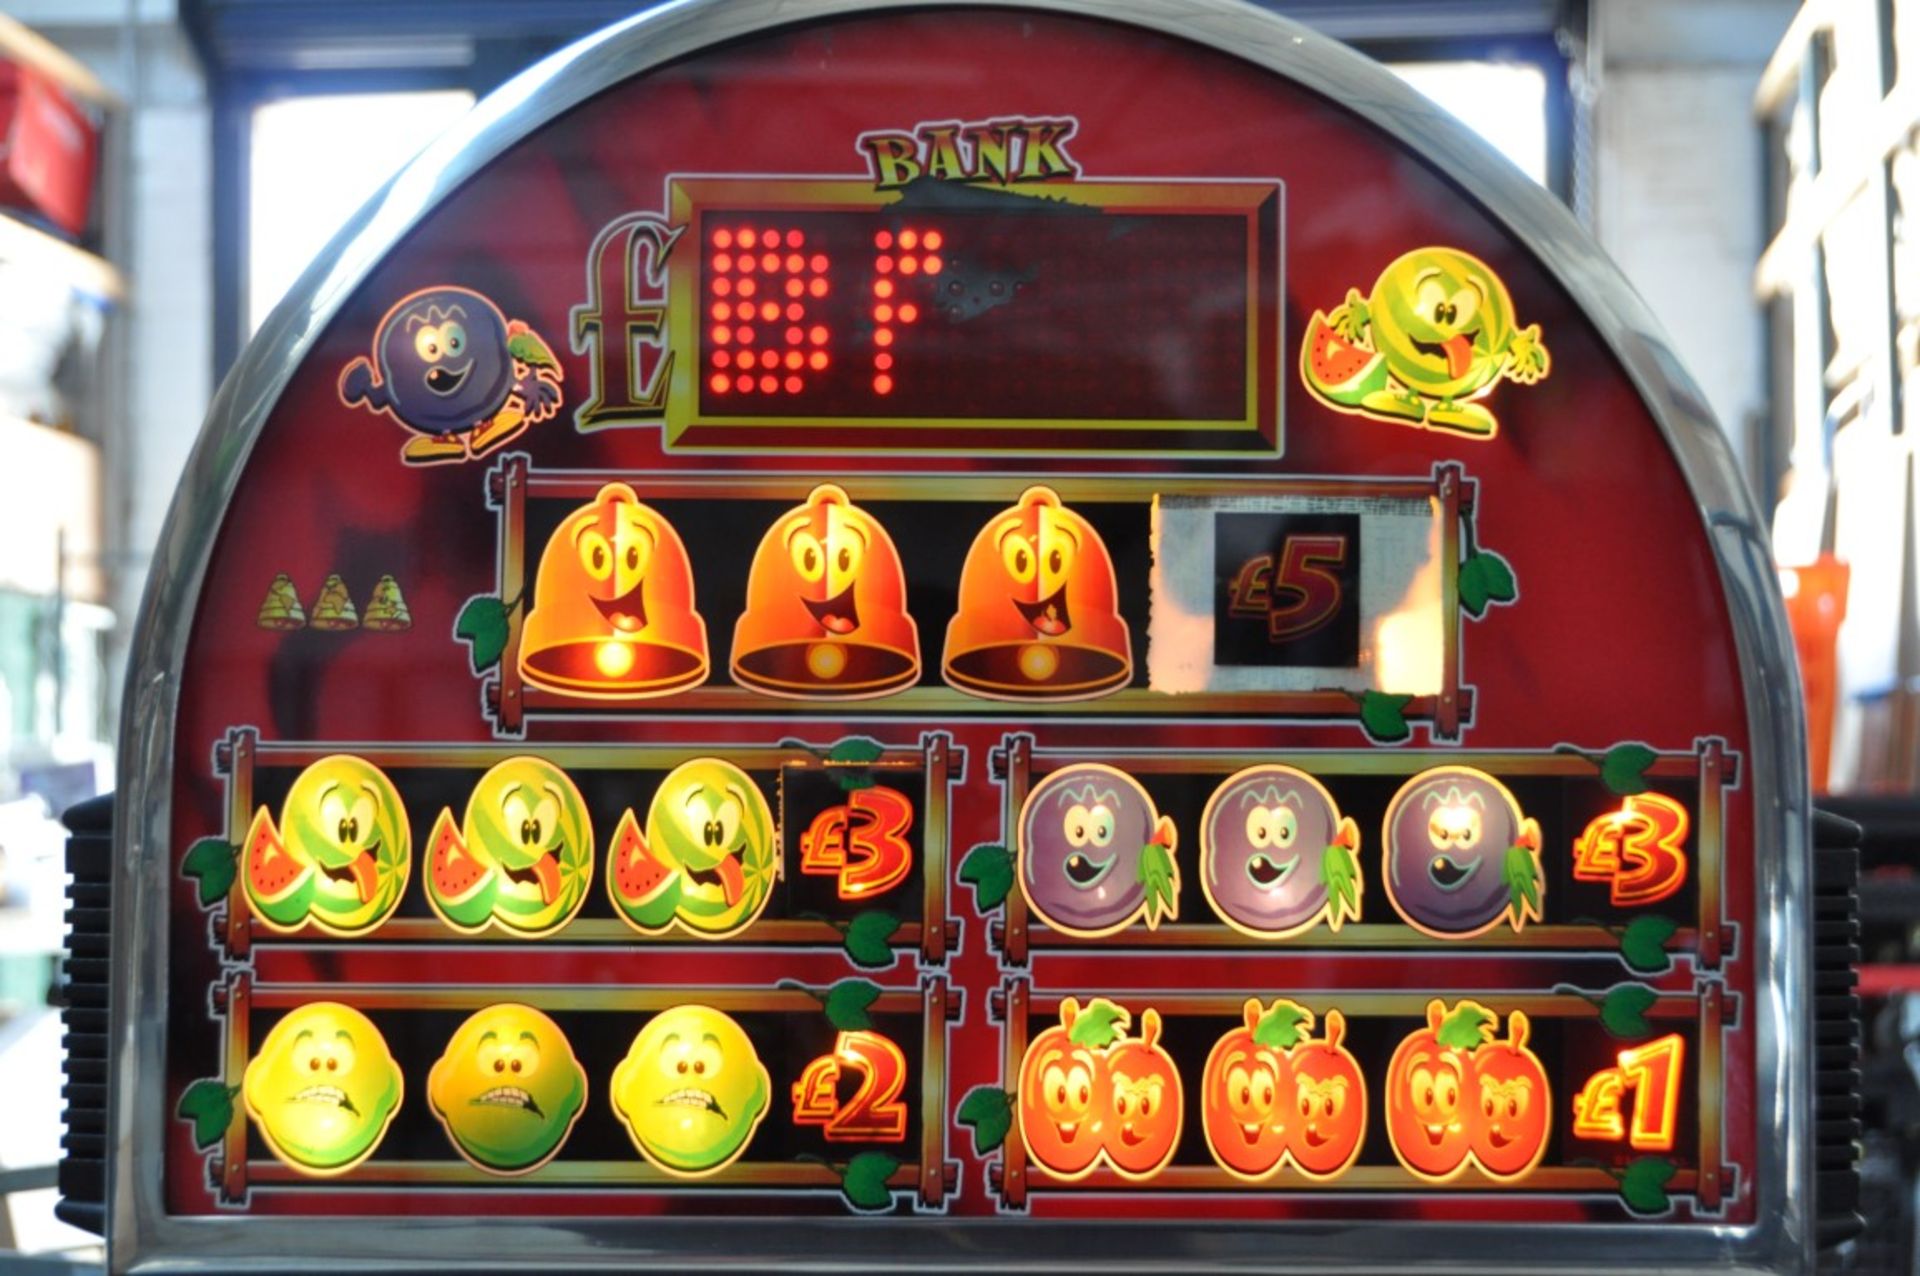 1 x "CRAZY FRUITS" Arcade Fruit Machine - Manufacturer: Casino - Pre-Owned In Good Working - Image 3 of 7